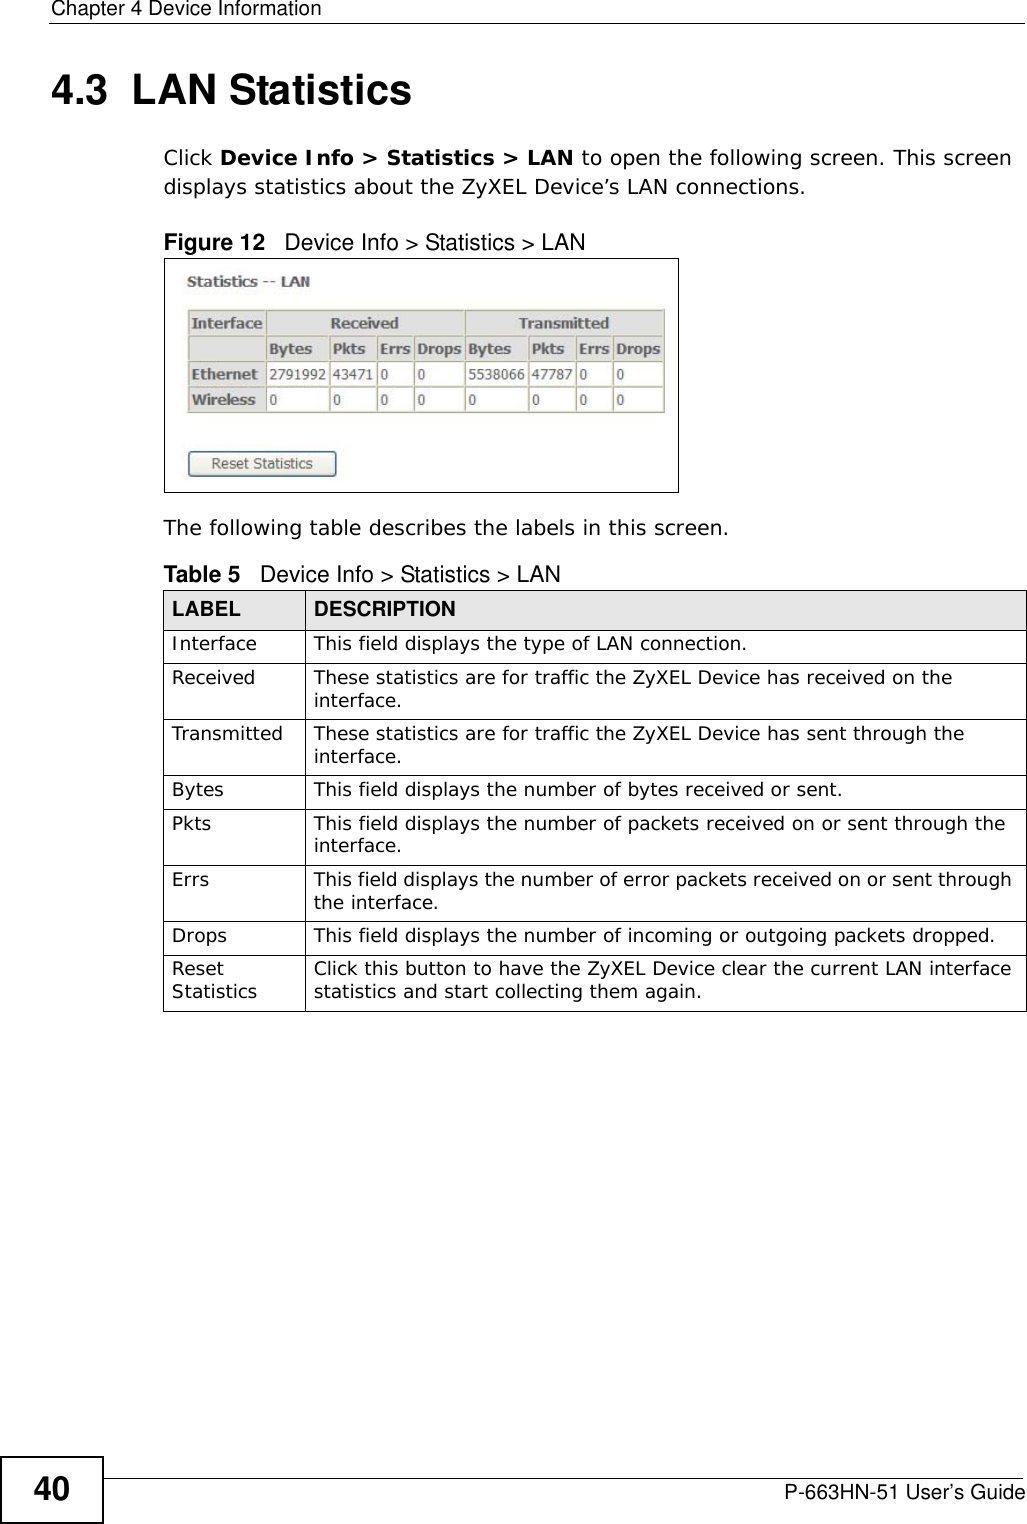 Chapter 4 Device InformationP-663HN-51 User’s Guide404.3  LAN StatisticsClick Device Info &gt; Statistics &gt; LAN to open the following screen. This screen displays statistics about the ZyXEL Device’s LAN connections.Figure 12   Device Info &gt; Statistics &gt; LAN The following table describes the labels in this screen.Table 5   Device Info &gt; Statistics &gt; LANLABEL  DESCRIPTIONInterface This field displays the type of LAN connection.Received These statistics are for traffic the ZyXEL Device has received on the interface.Transmitted These statistics are for traffic the ZyXEL Device has sent through the interface.Bytes This field displays the number of bytes received or sent.Pkts  This field displays the number of packets received on or sent through the interface.Errs This field displays the number of error packets received on or sent through the interface.Drops This field displays the number of incoming or outgoing packets dropped.Reset Statistics Click this button to have the ZyXEL Device clear the current LAN interface statistics and start collecting them again.